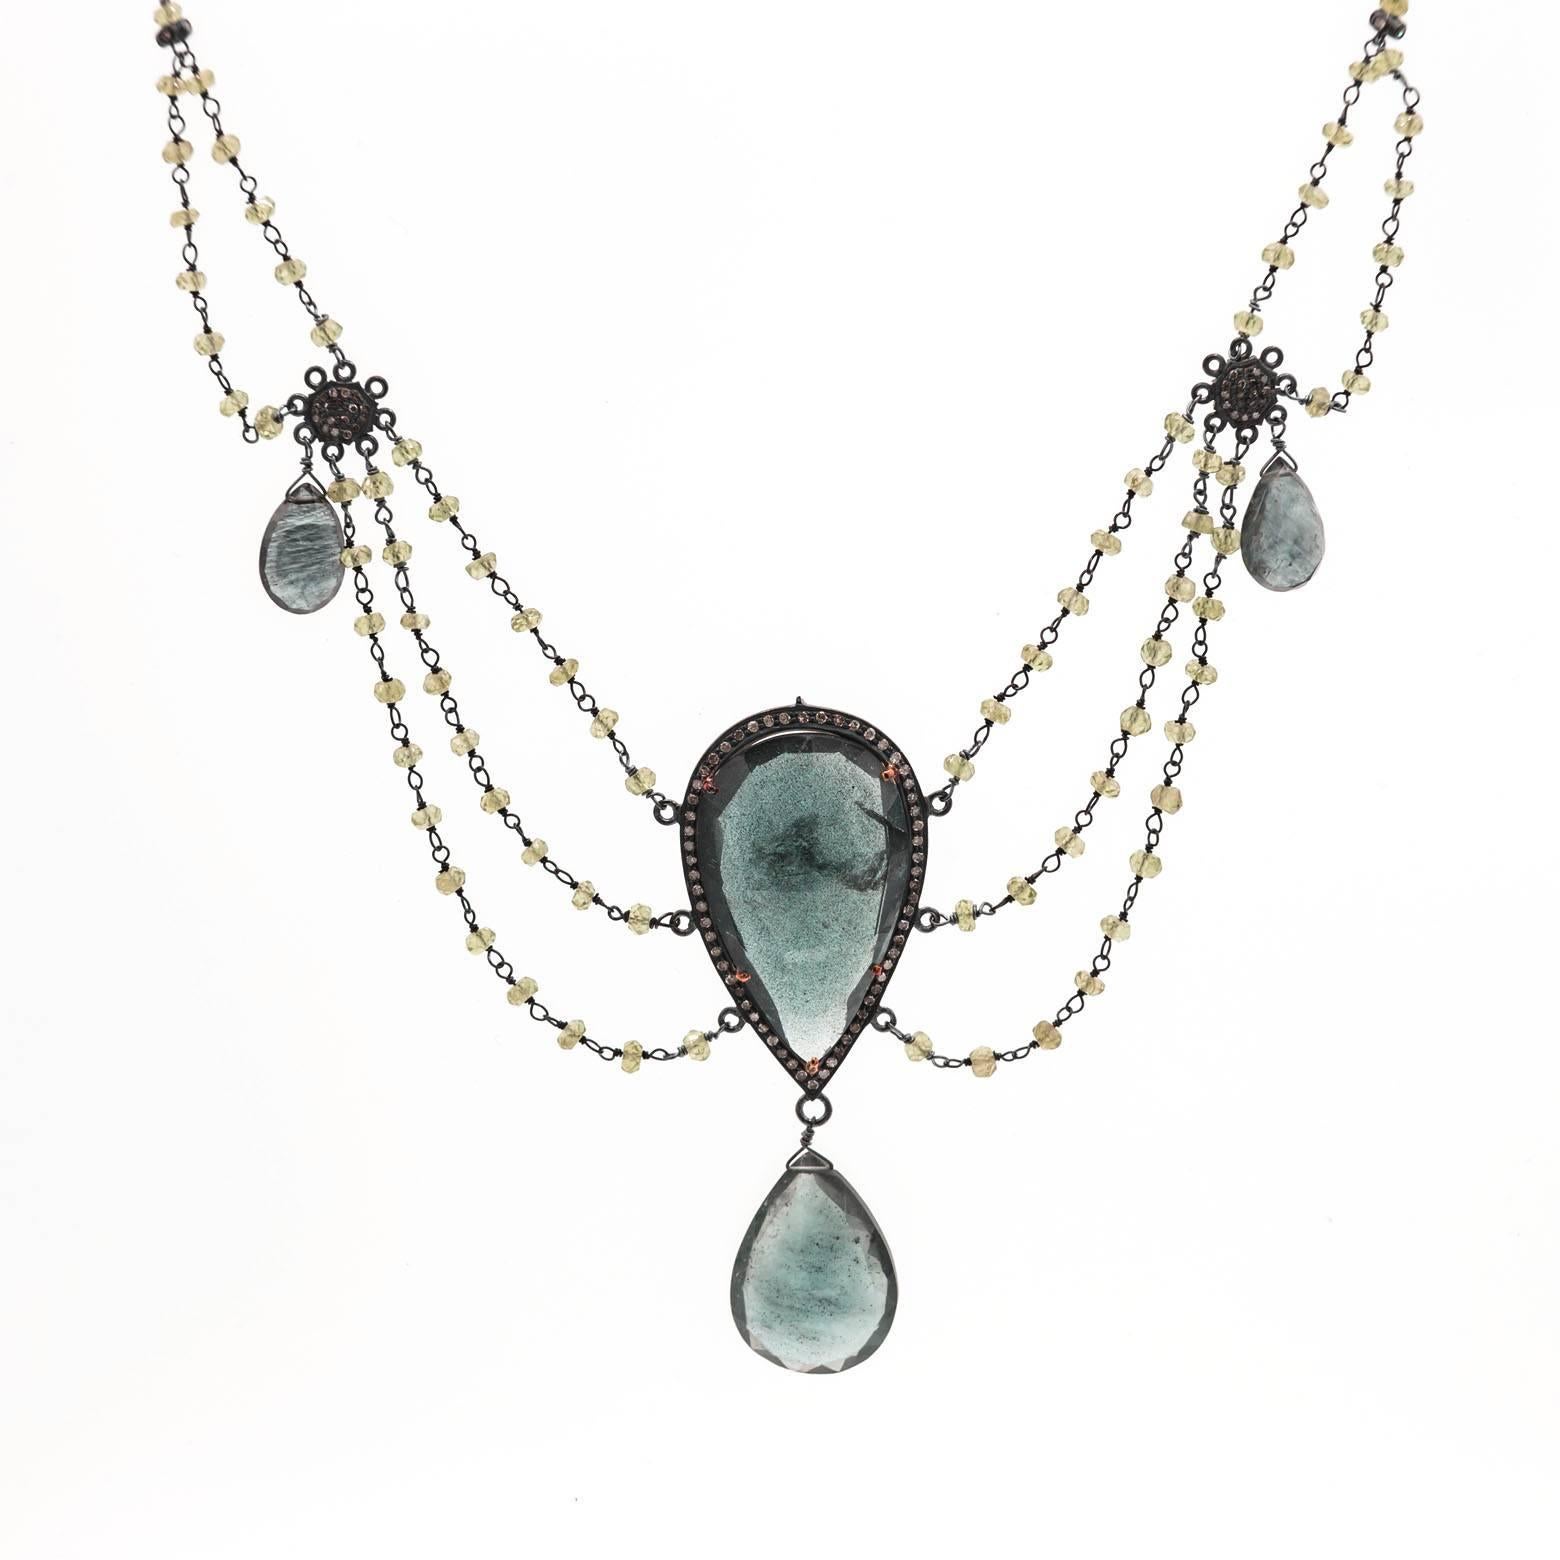 Elegant and Stunning Moss Aquamarine, Peridot and Diamond Multi-strand Necklace. This piece is absolutely stunning and story-telling. As if lifted out of a romance novel this necklace will transport you to a time of gowns and extravagance. 